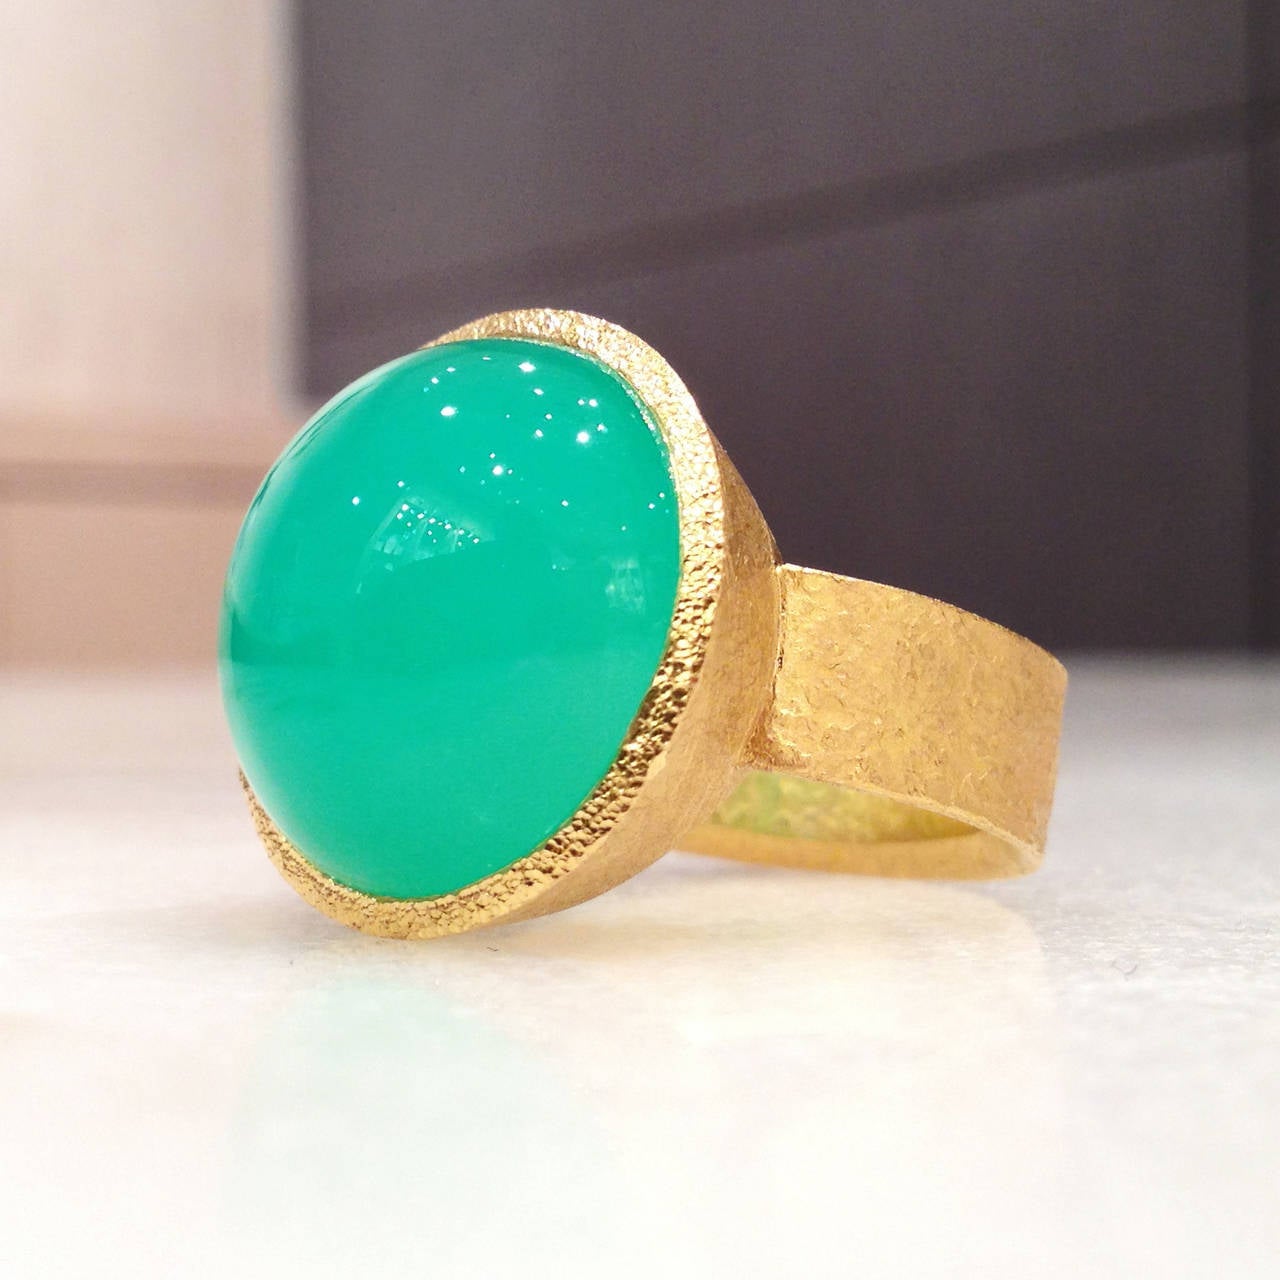 One-of-a-Kind Bubble Ring handcrafted in 22k yellow gold with a cabochon-cut, fine color chrysoprase. Size 8.75 (Can be Sized)